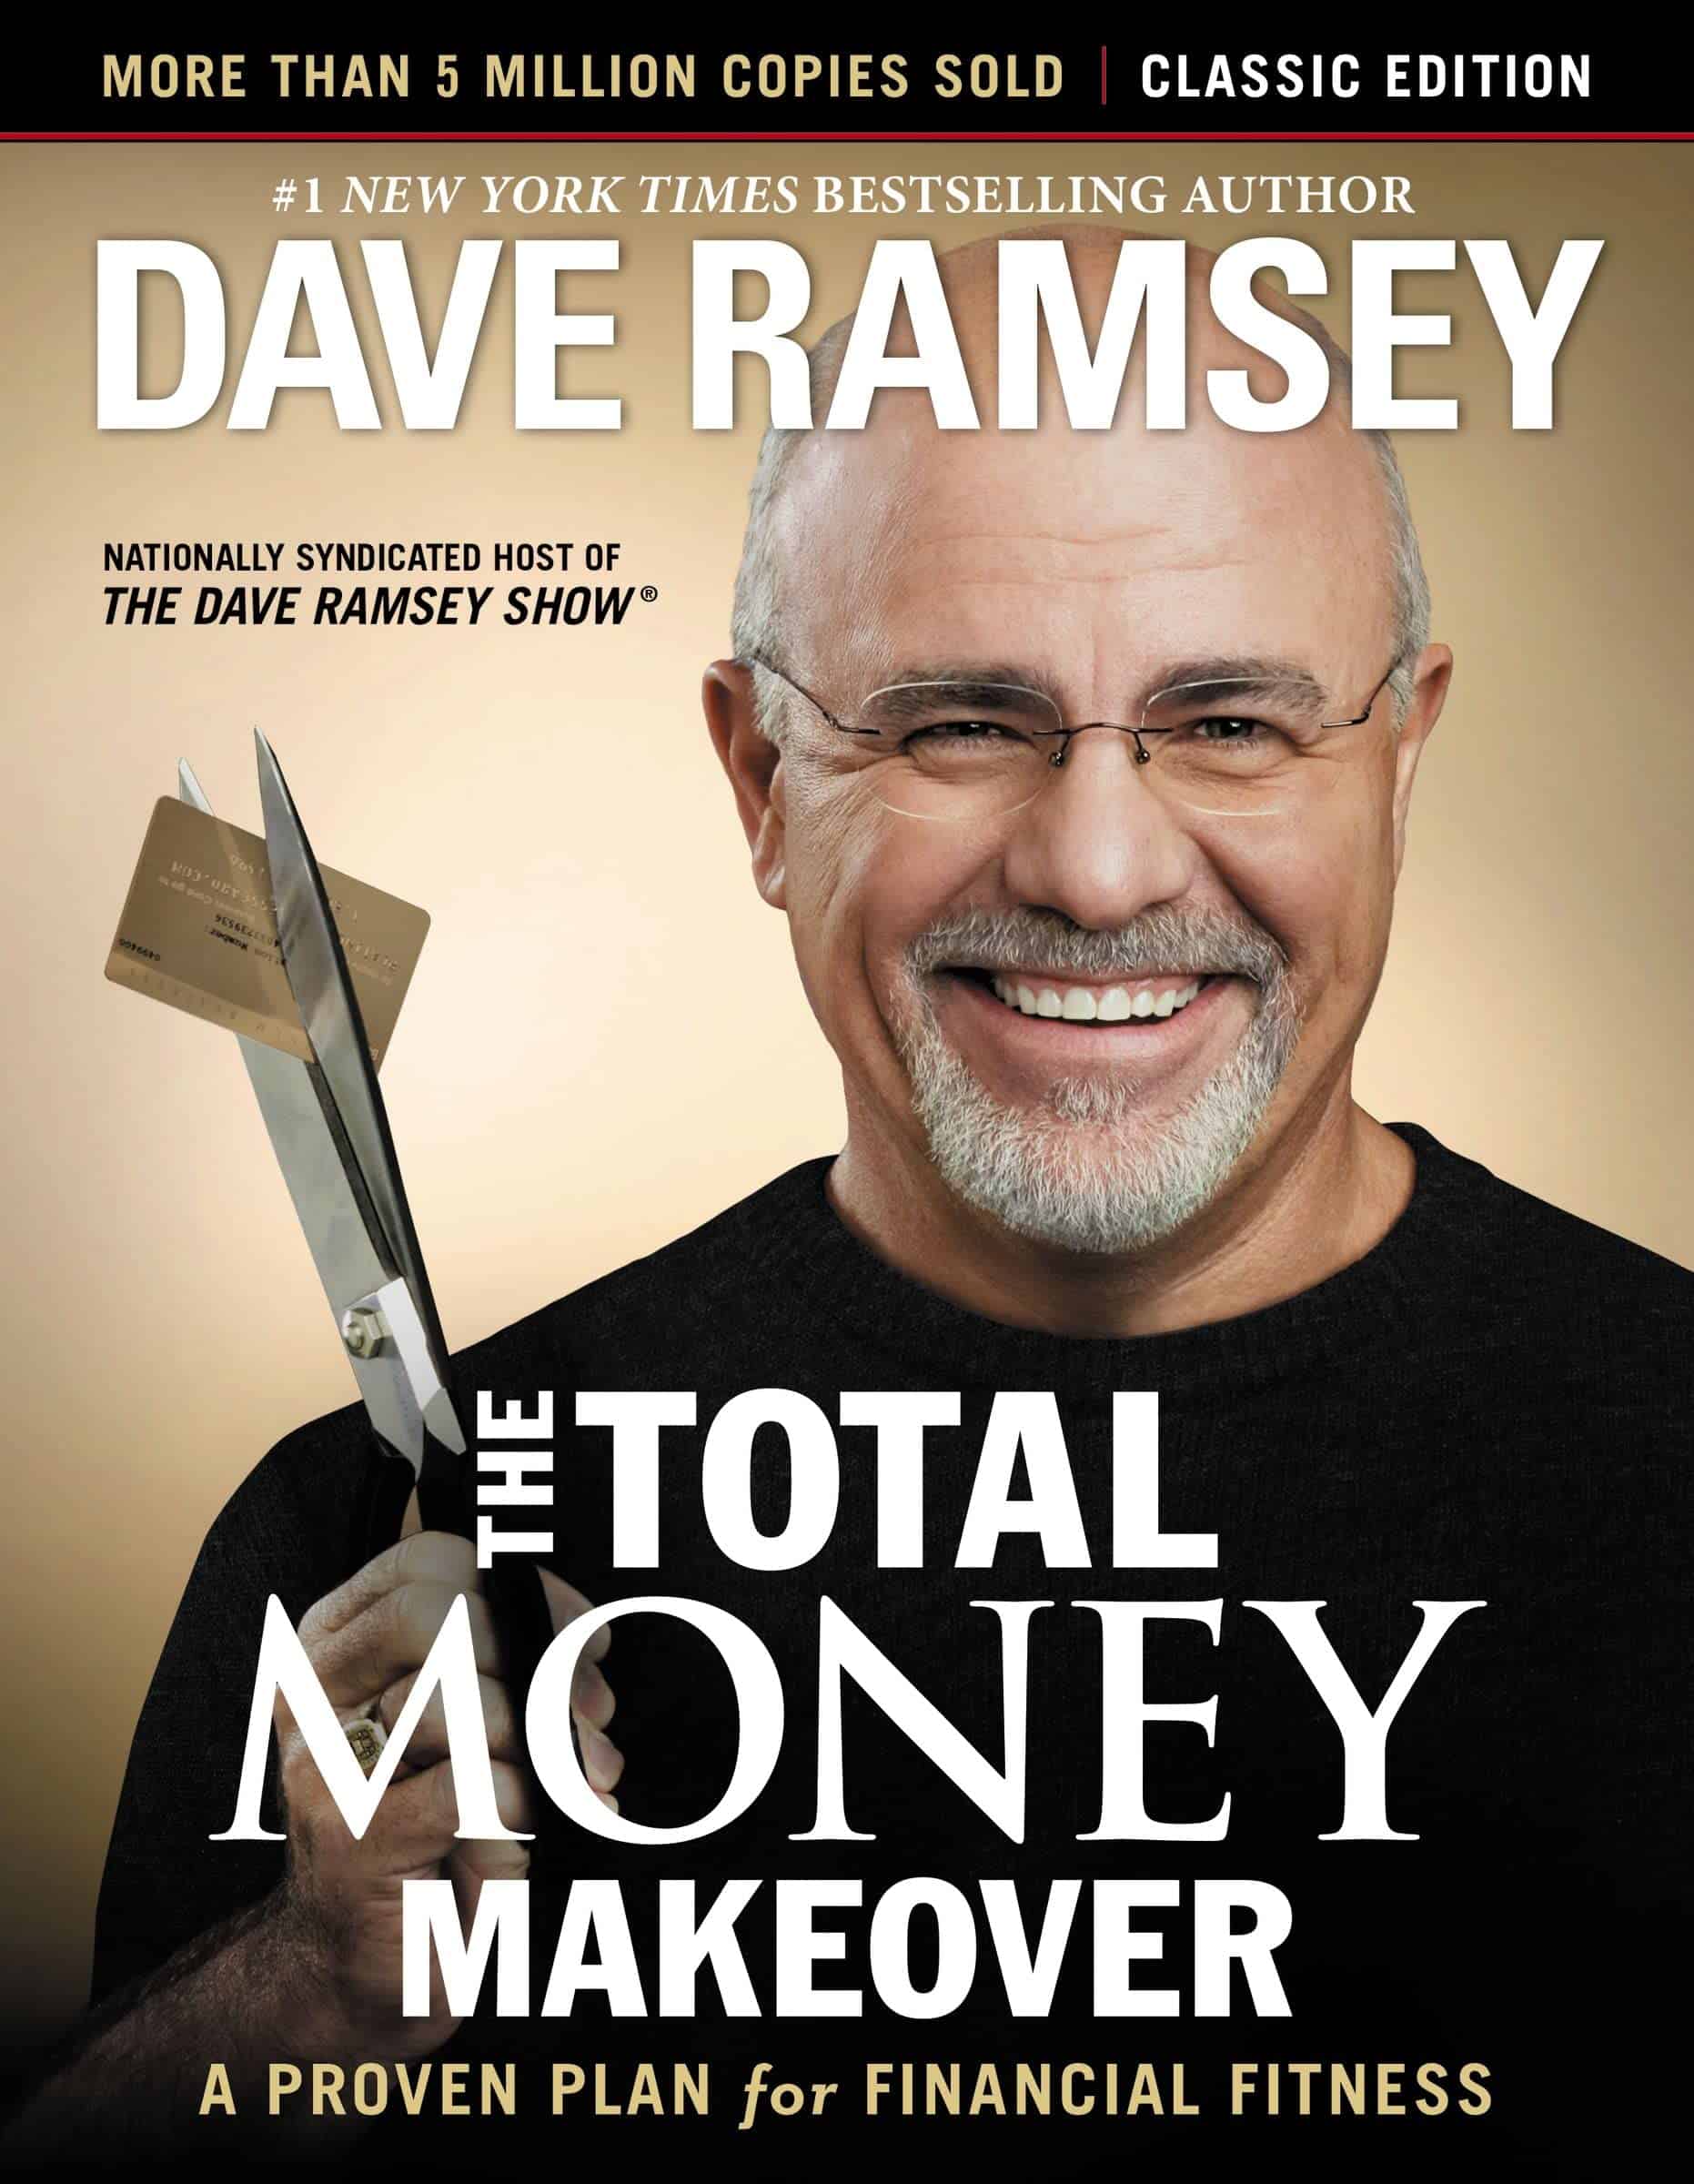 The Book Cover For The Total Money Makeover By Dave Ramsey